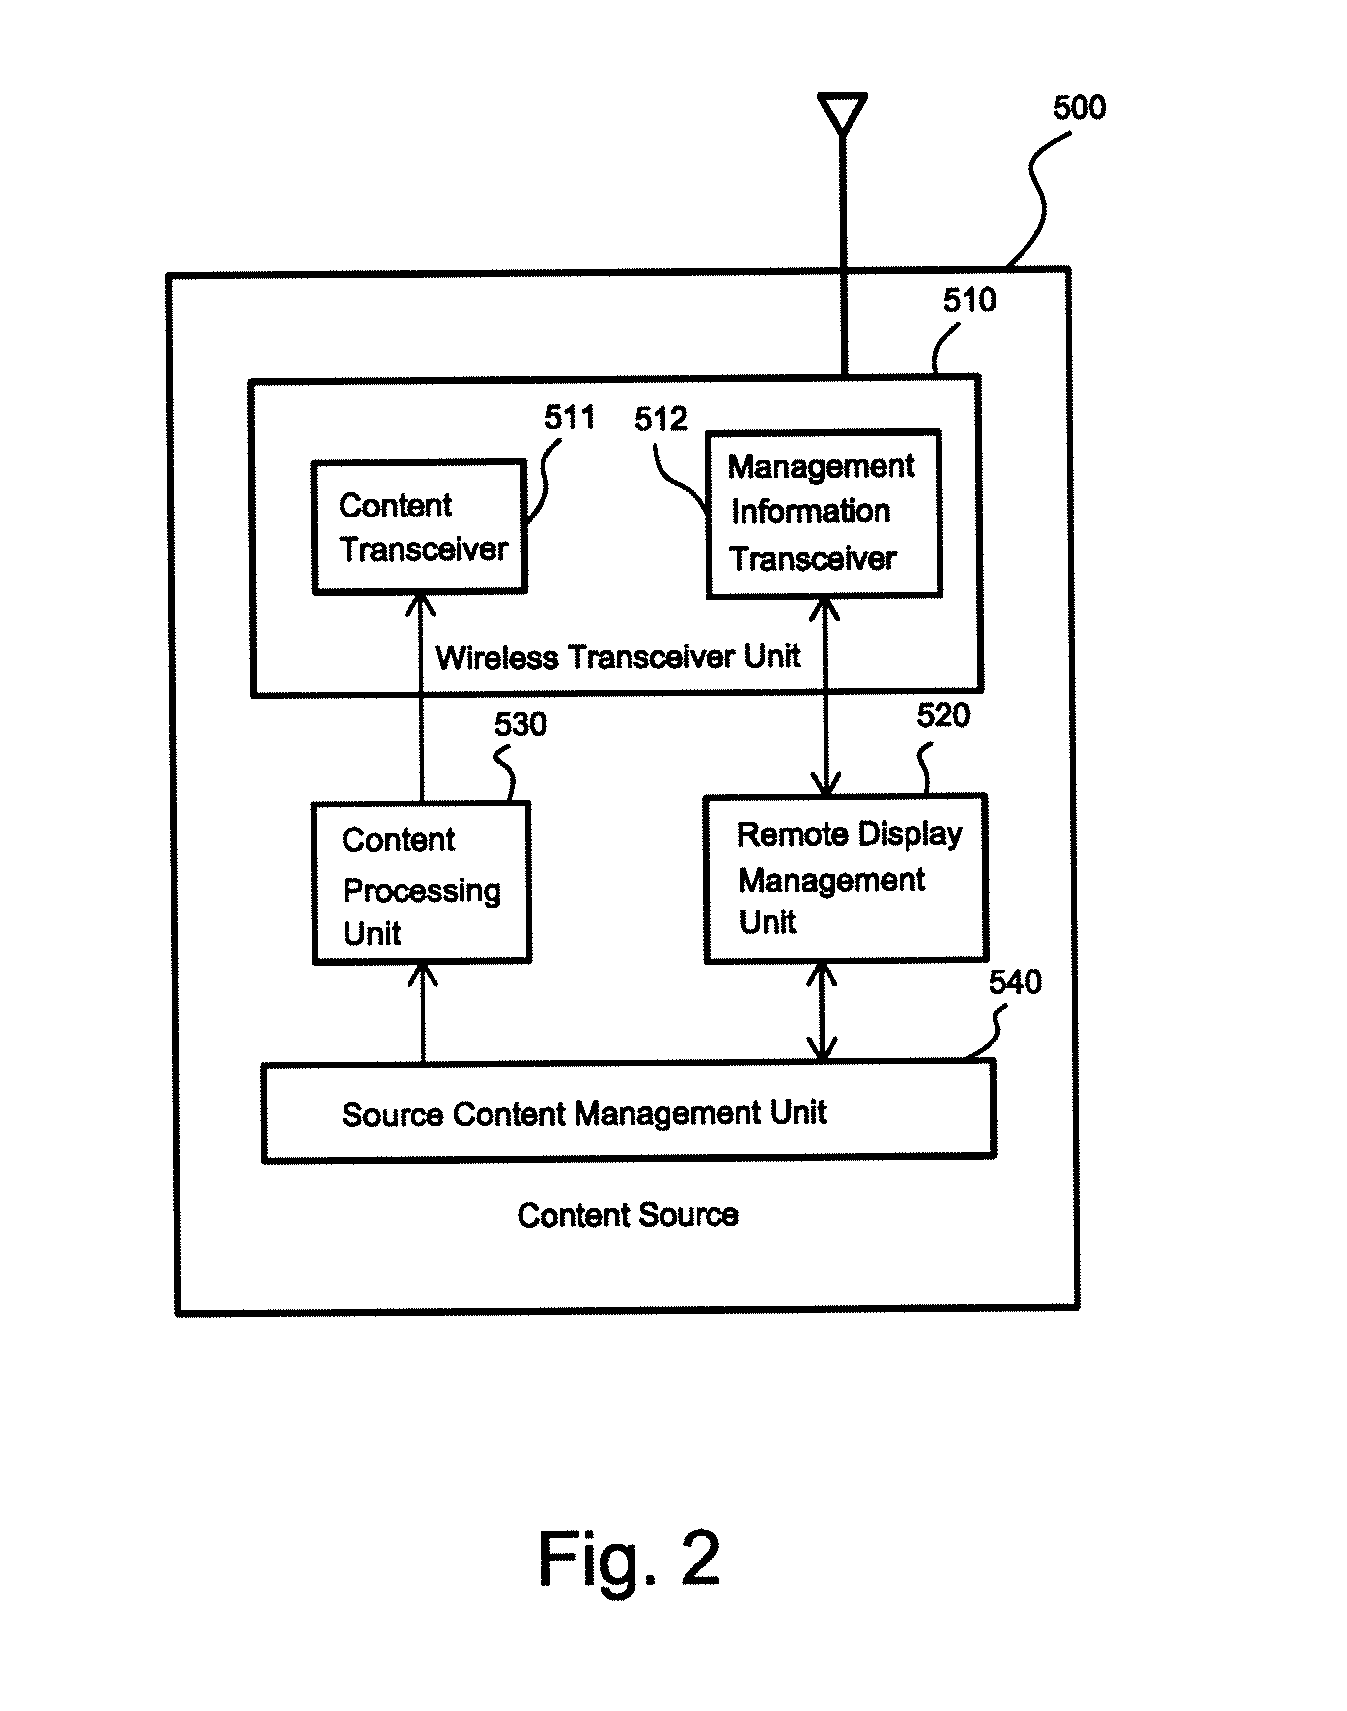 Content Source, Content Sink, And Method for Natively Managing and Delivering Active Content From One or More Content Sources to One or More Content Sinks Wirelessly